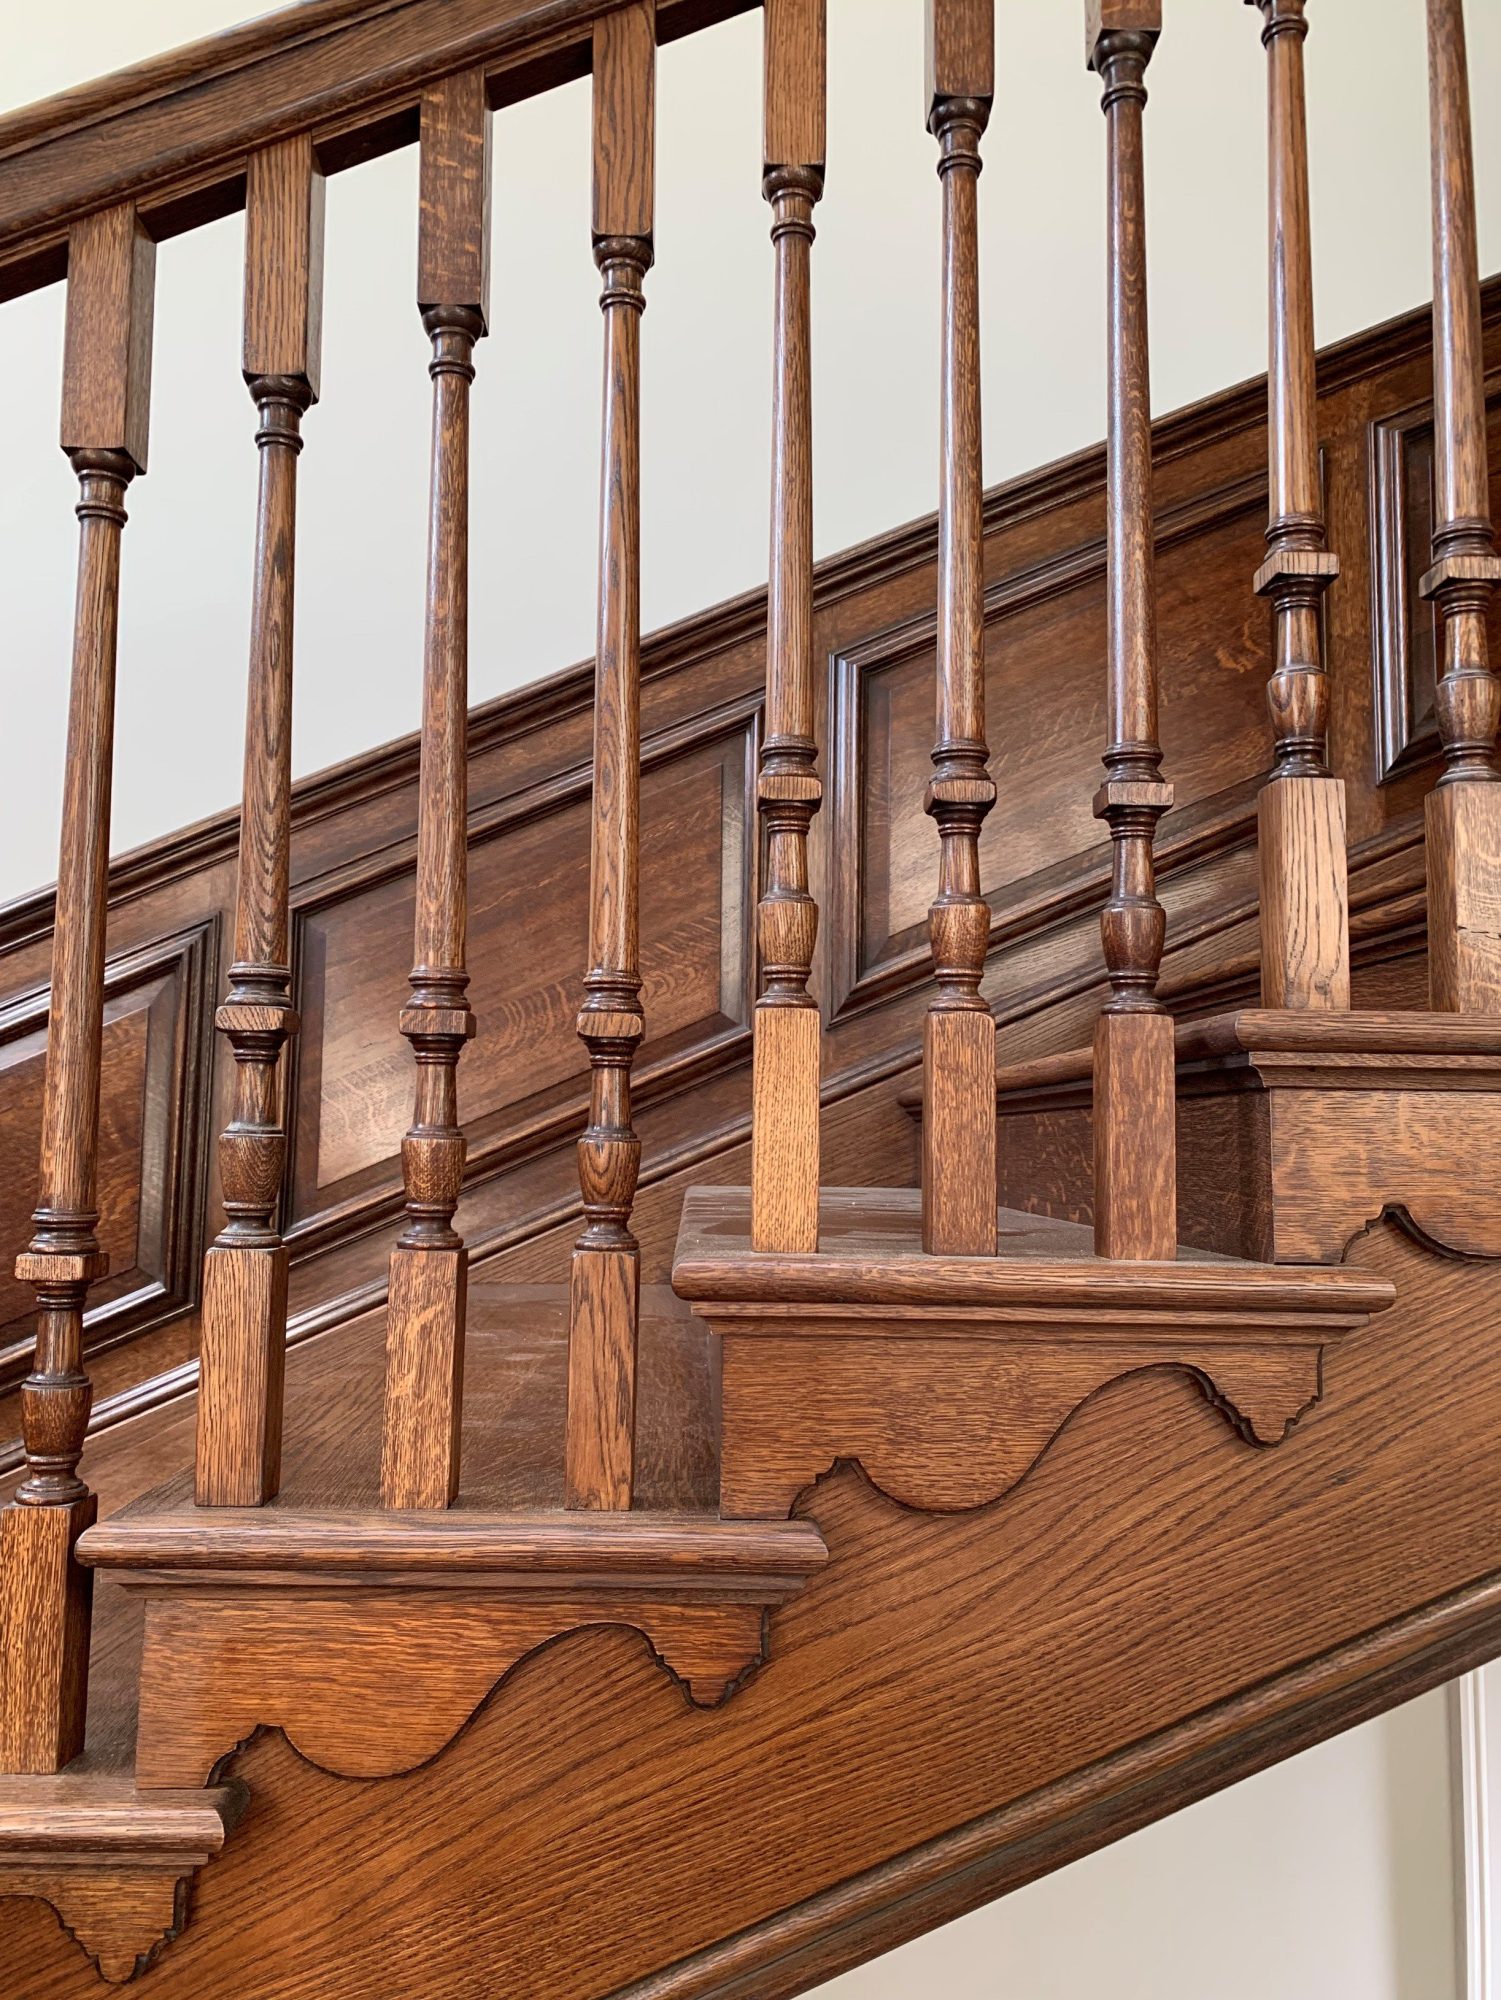 Sarah Beeny commissioned a Georgian style solid oak staircase for her Somerset project